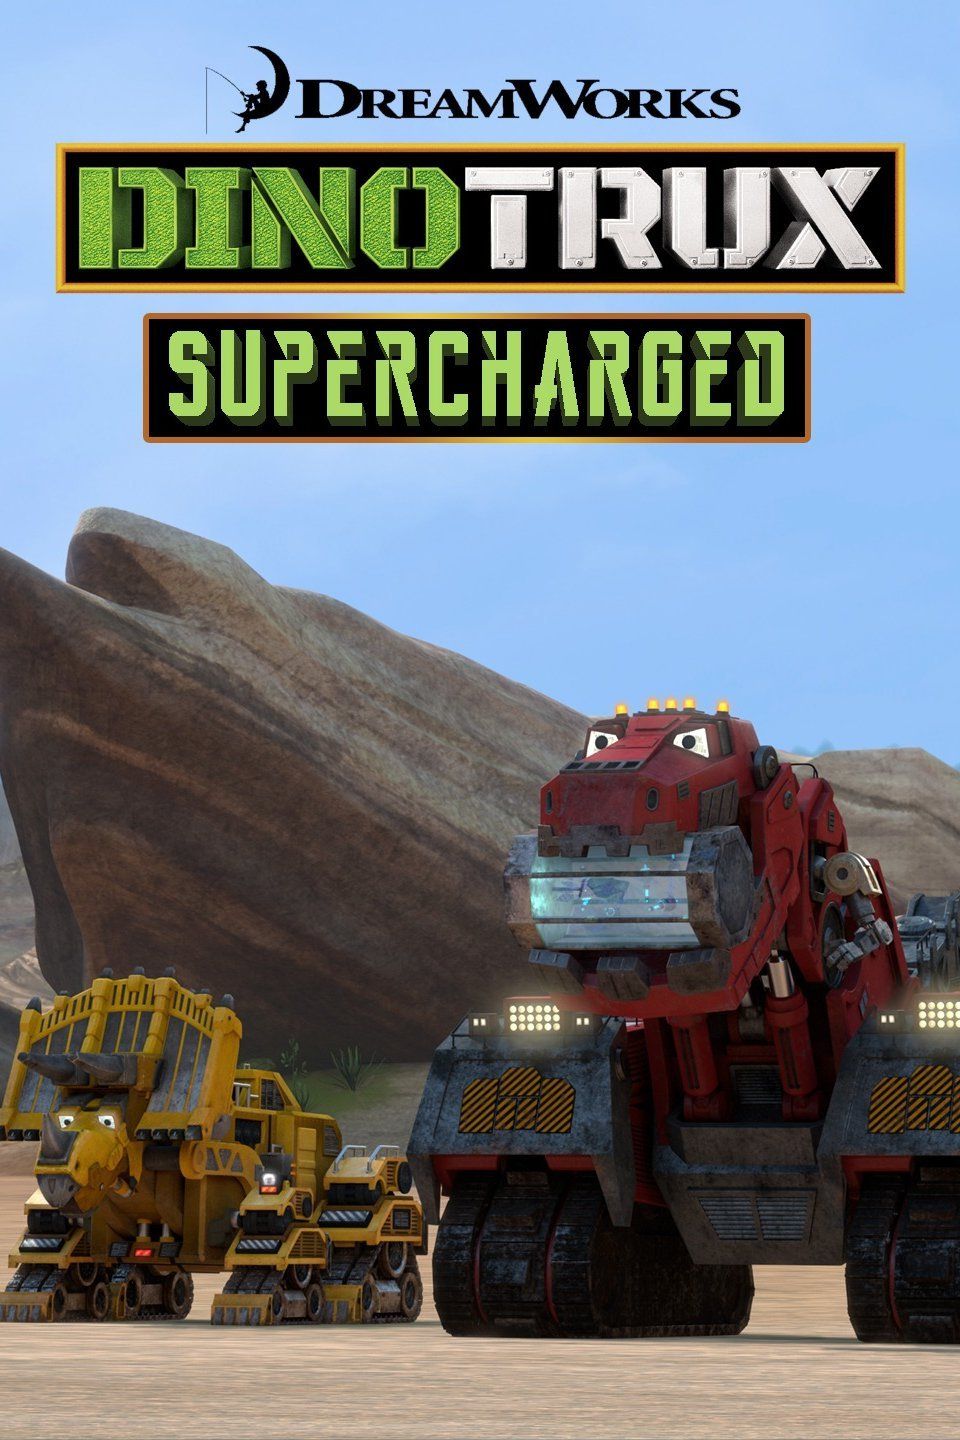 Dinotrux Supercharged (TV Series 2017– )